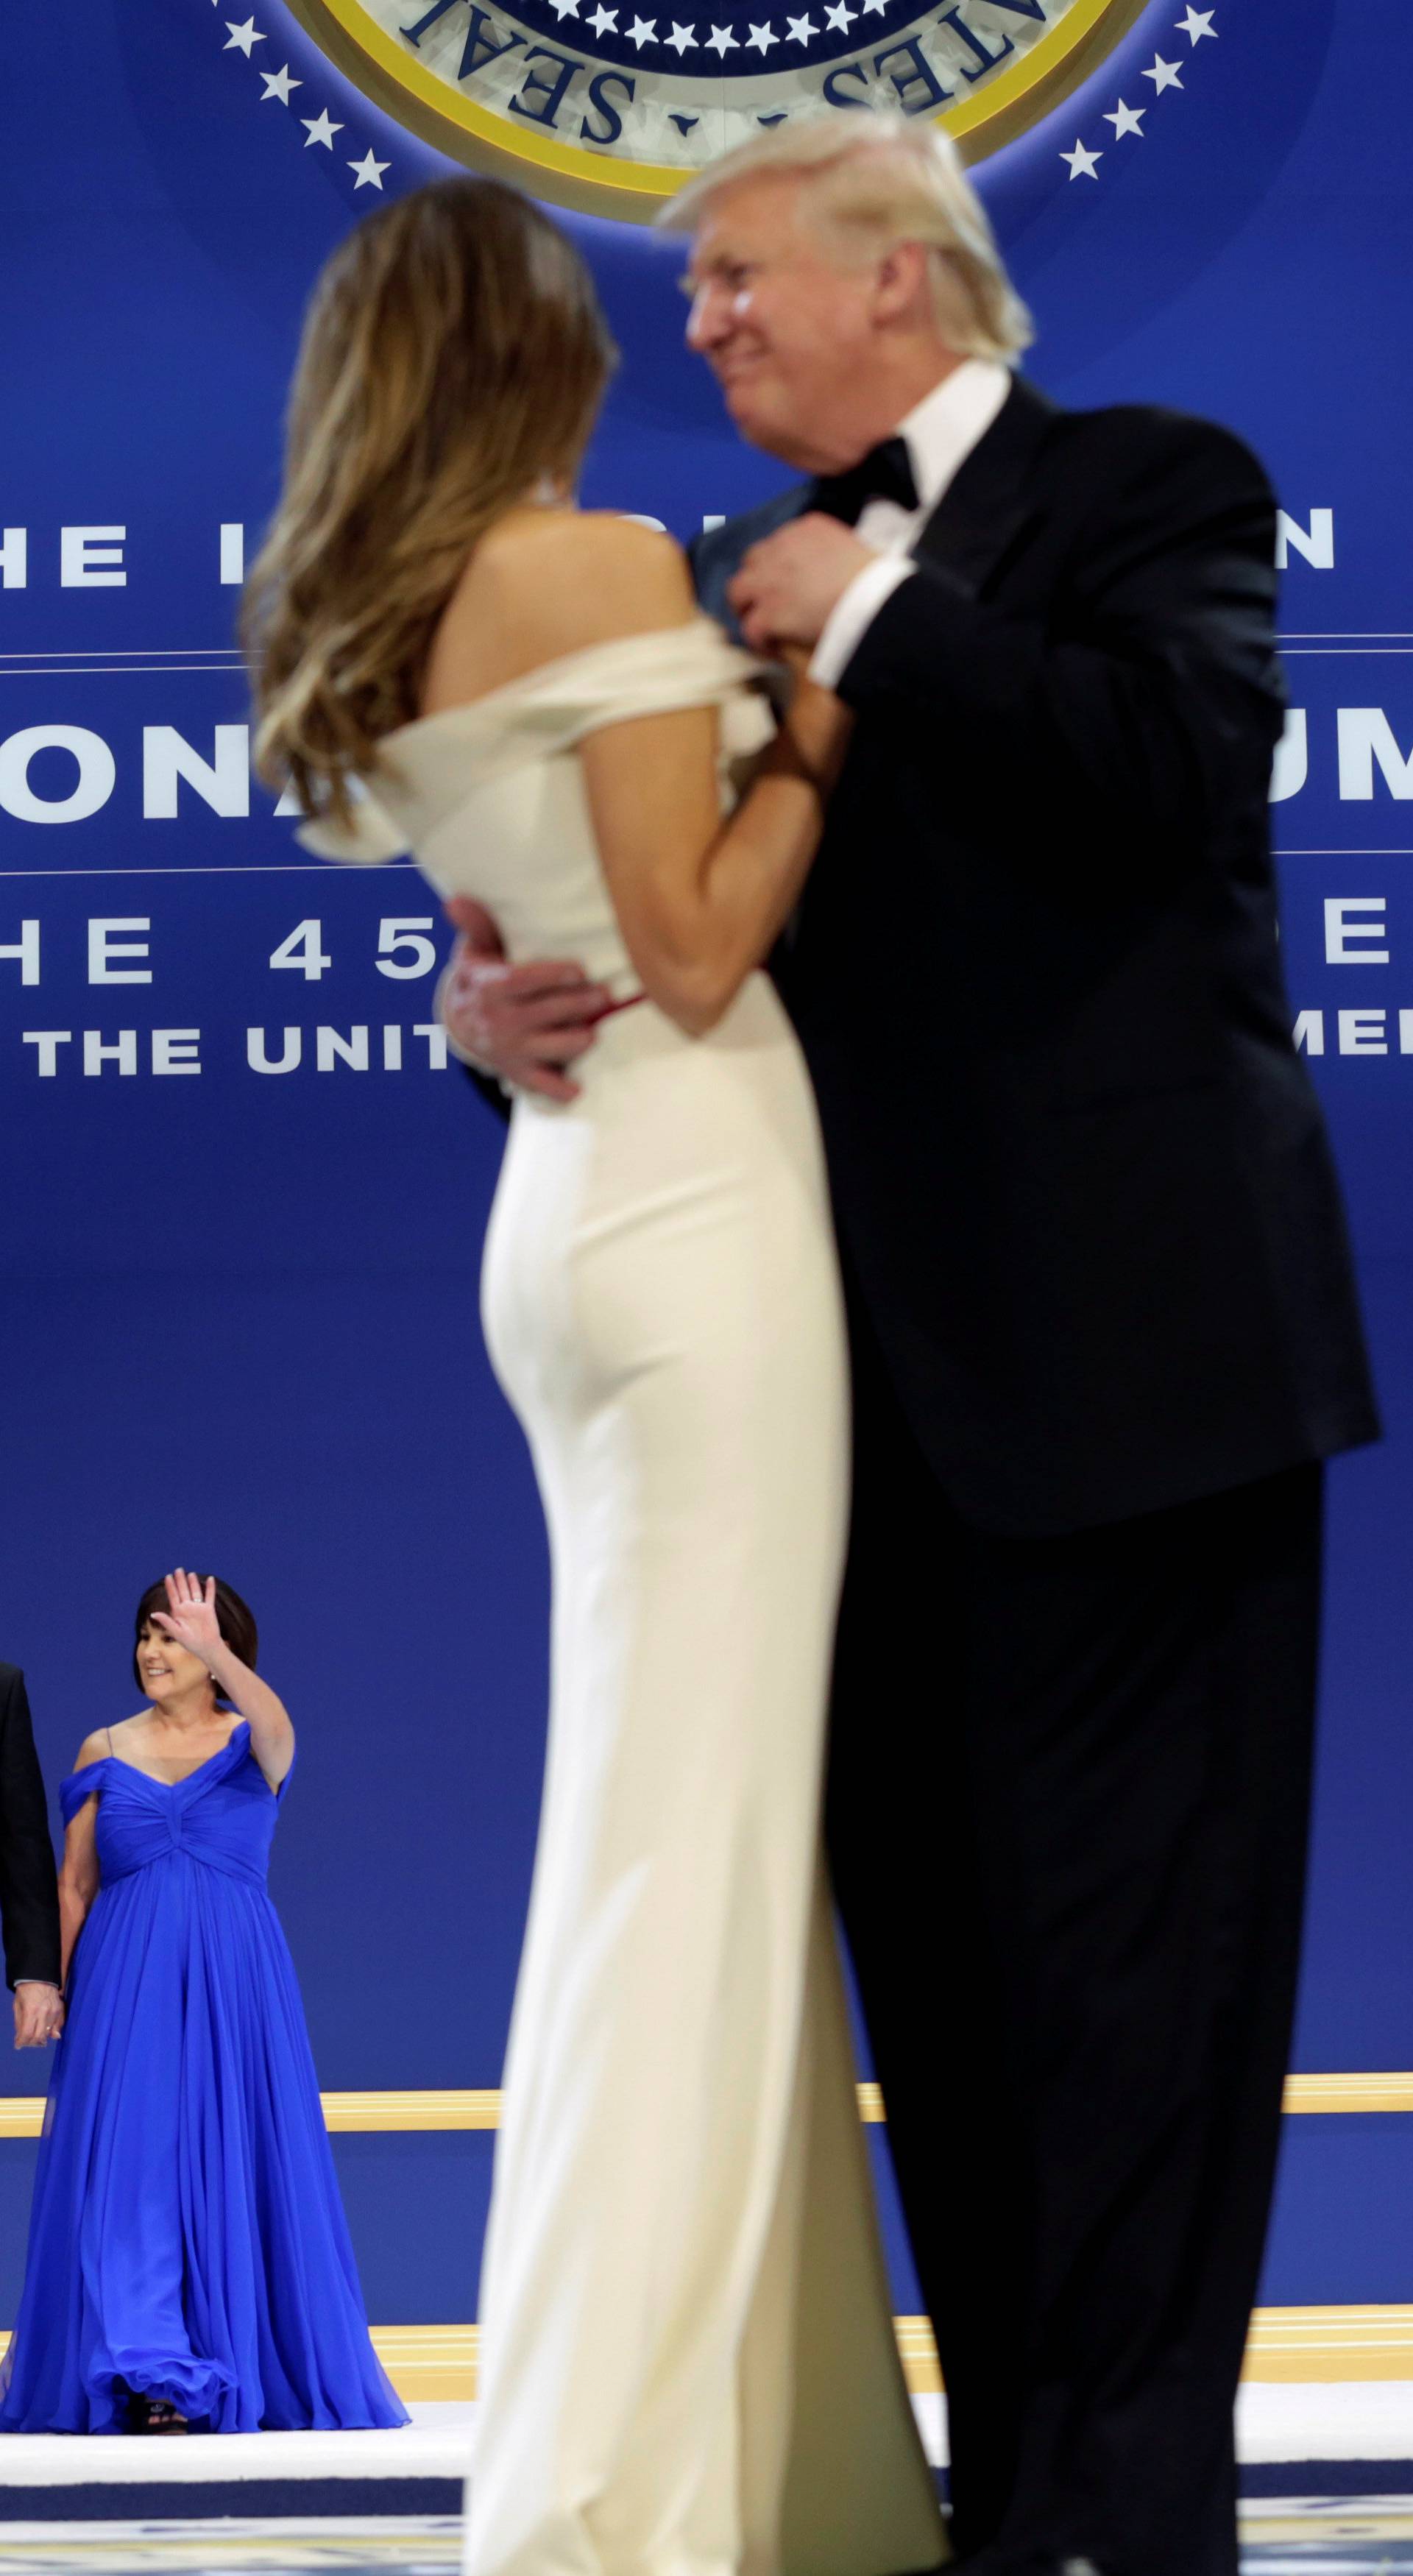 President Donald Trump with his wife Melania and Vice President Mike Pence with his wife Karen dance at the Armed Services Ball